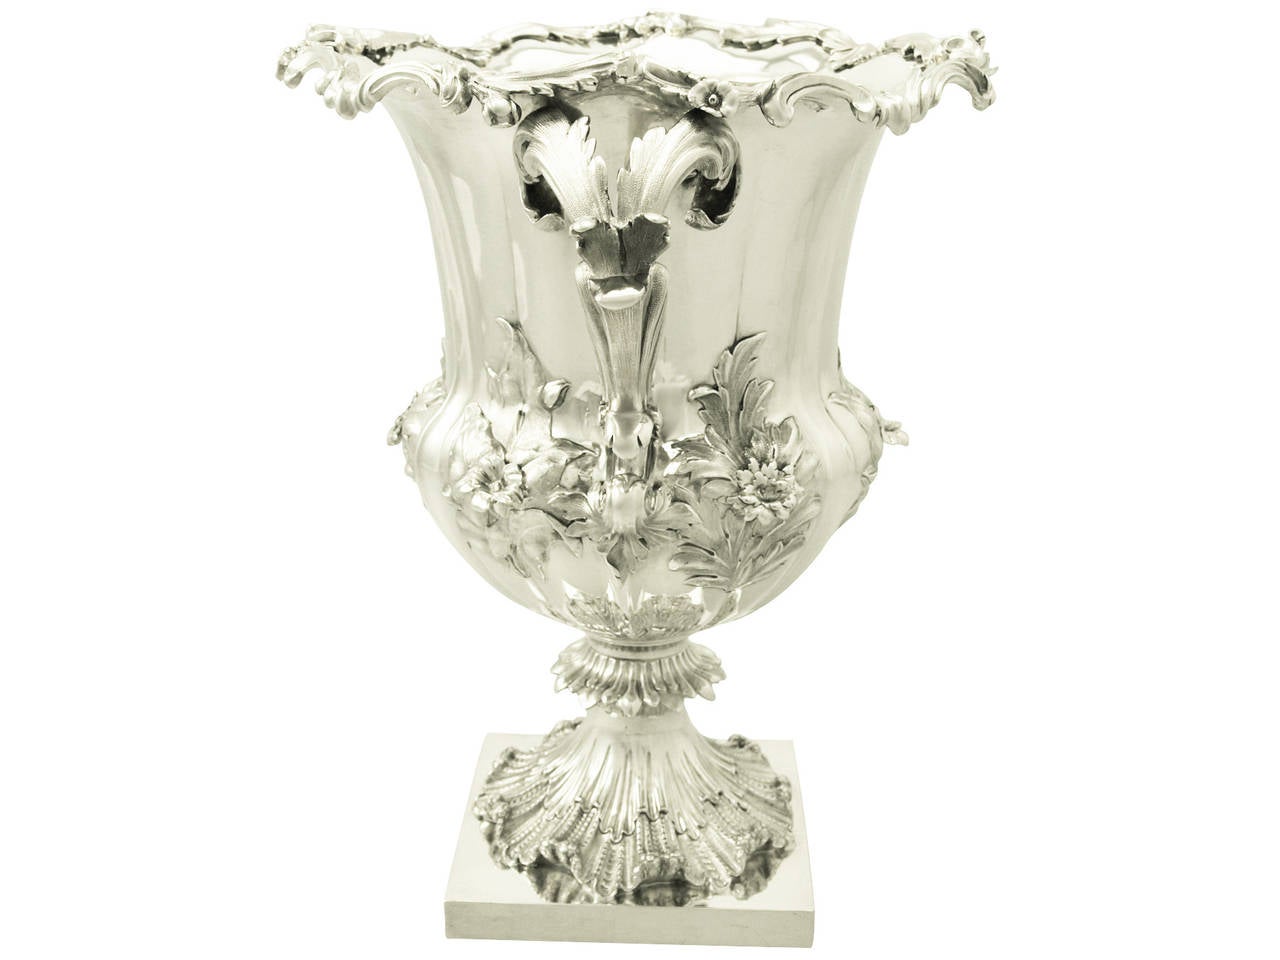 A fine and impressive antique early Victorian sterling silver wine cooler; part of our antique wine / drink related silverware collection

This fine antique Victorian sterling silver wine cooler has a campania shaped form onto a cast square